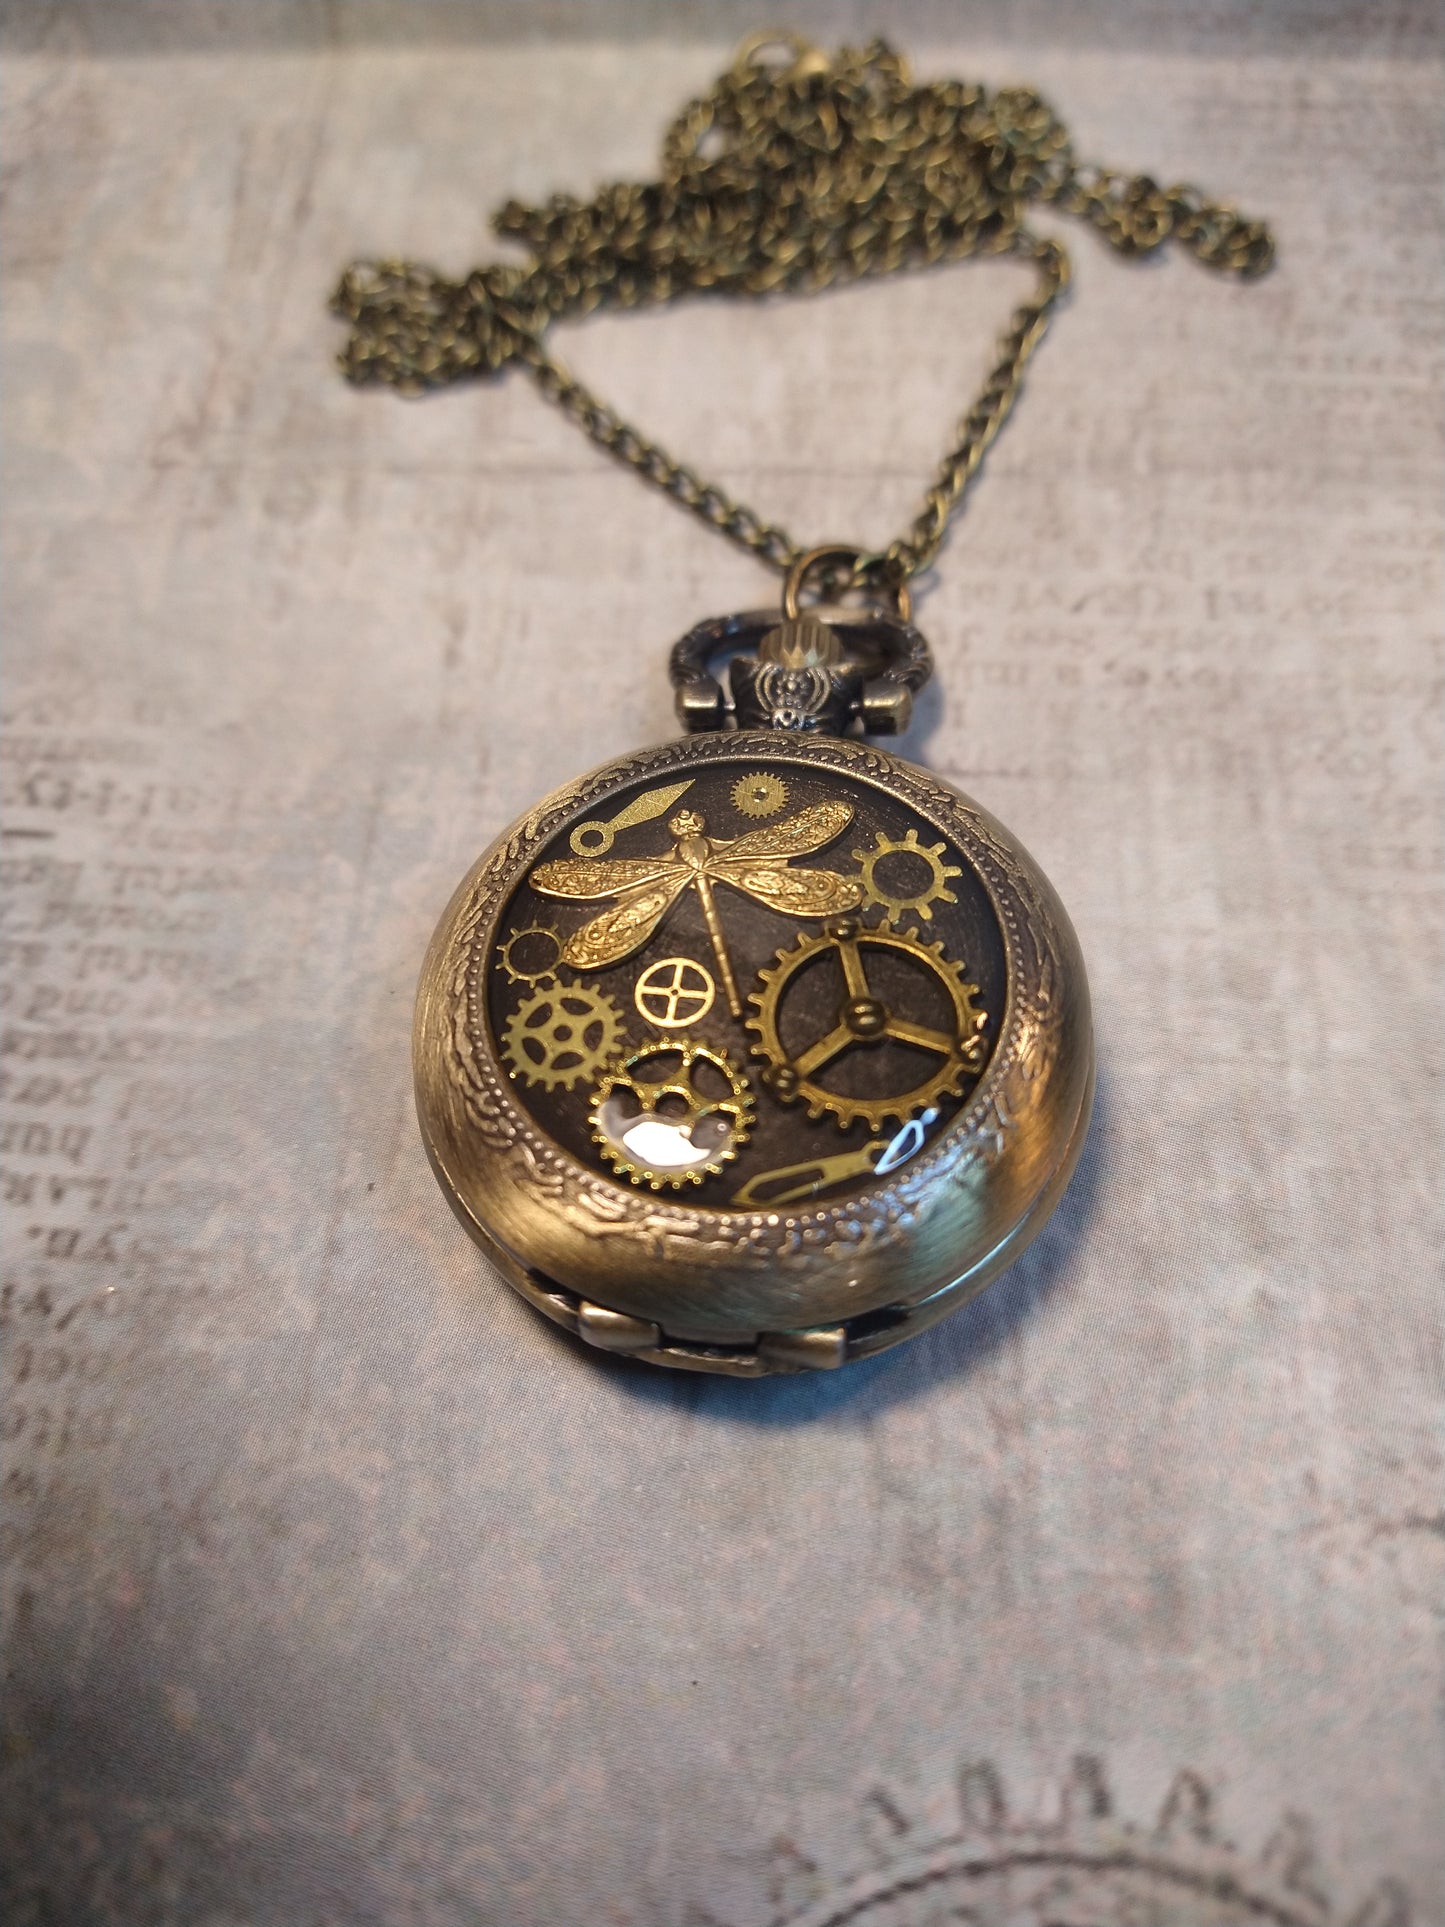 Working Clockwork Dragonfly with Gears Pocket Watch Necklace